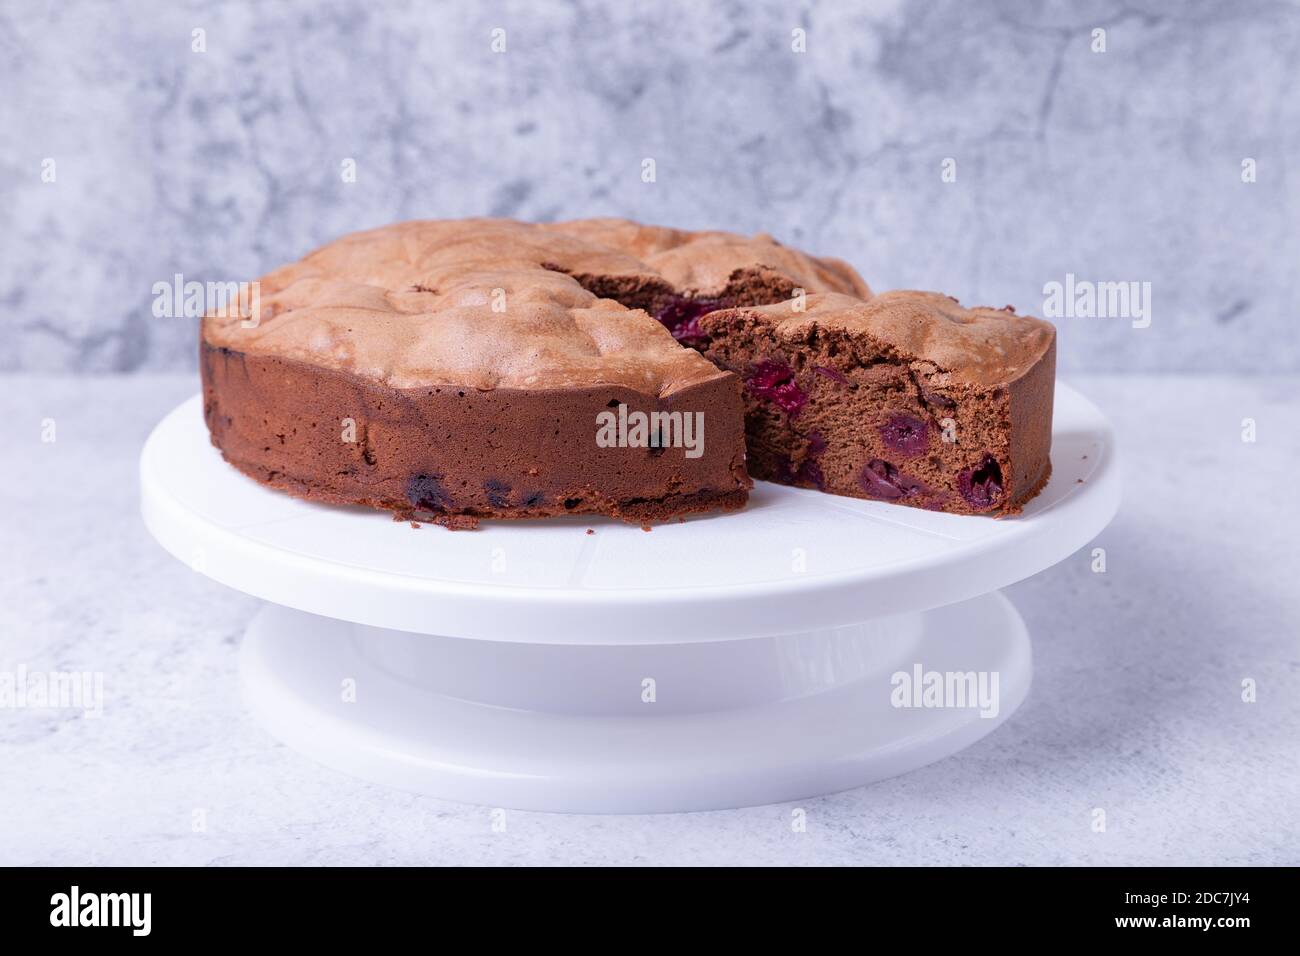 Chocolate pie with cherries on a white cake stand, one piece cut off. Homemade baking. Close-up. Stock Photo